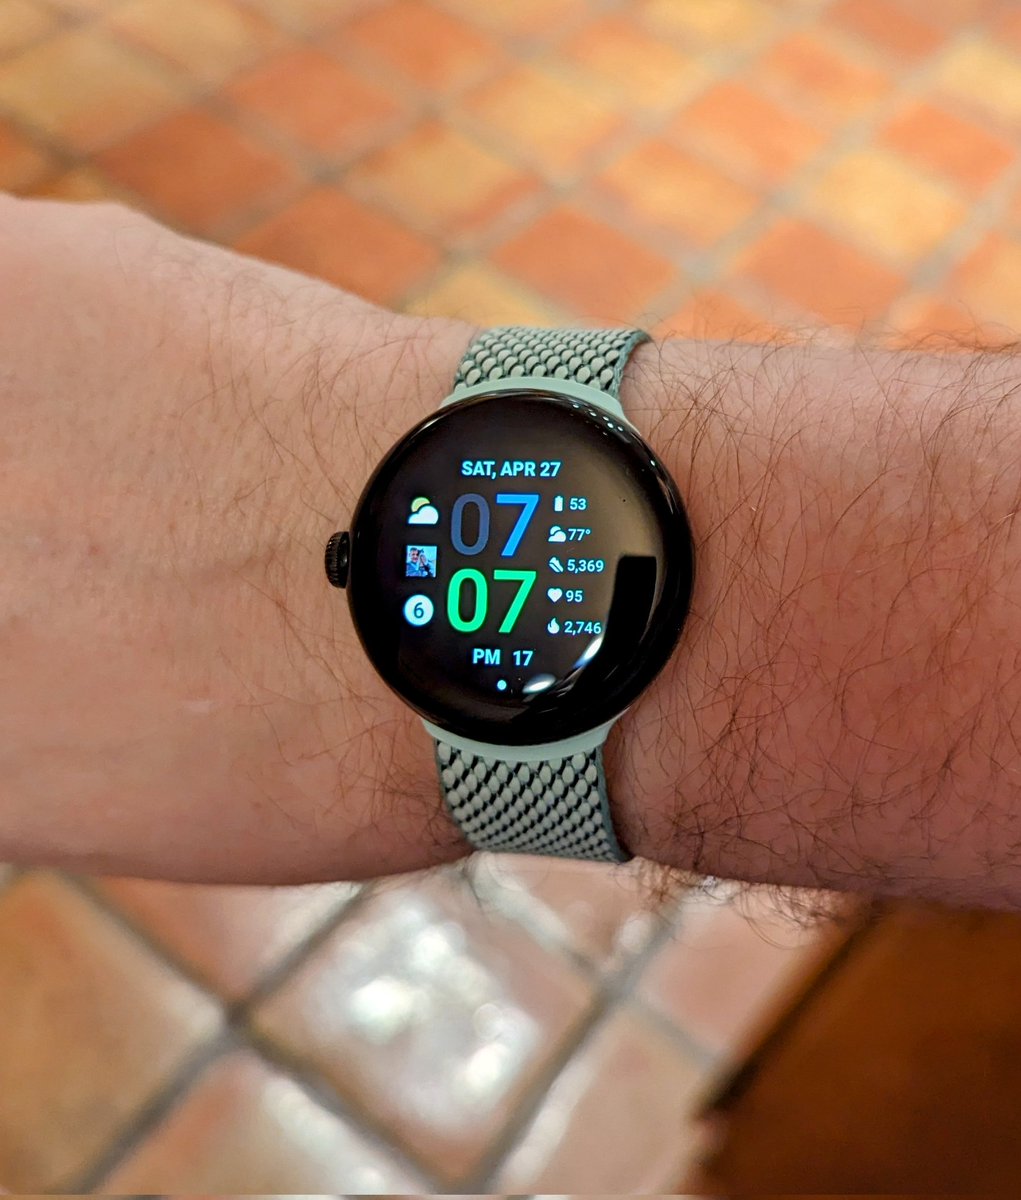 This is a new favorite! Great layout and customization. #PixelWatch #TeamPixel